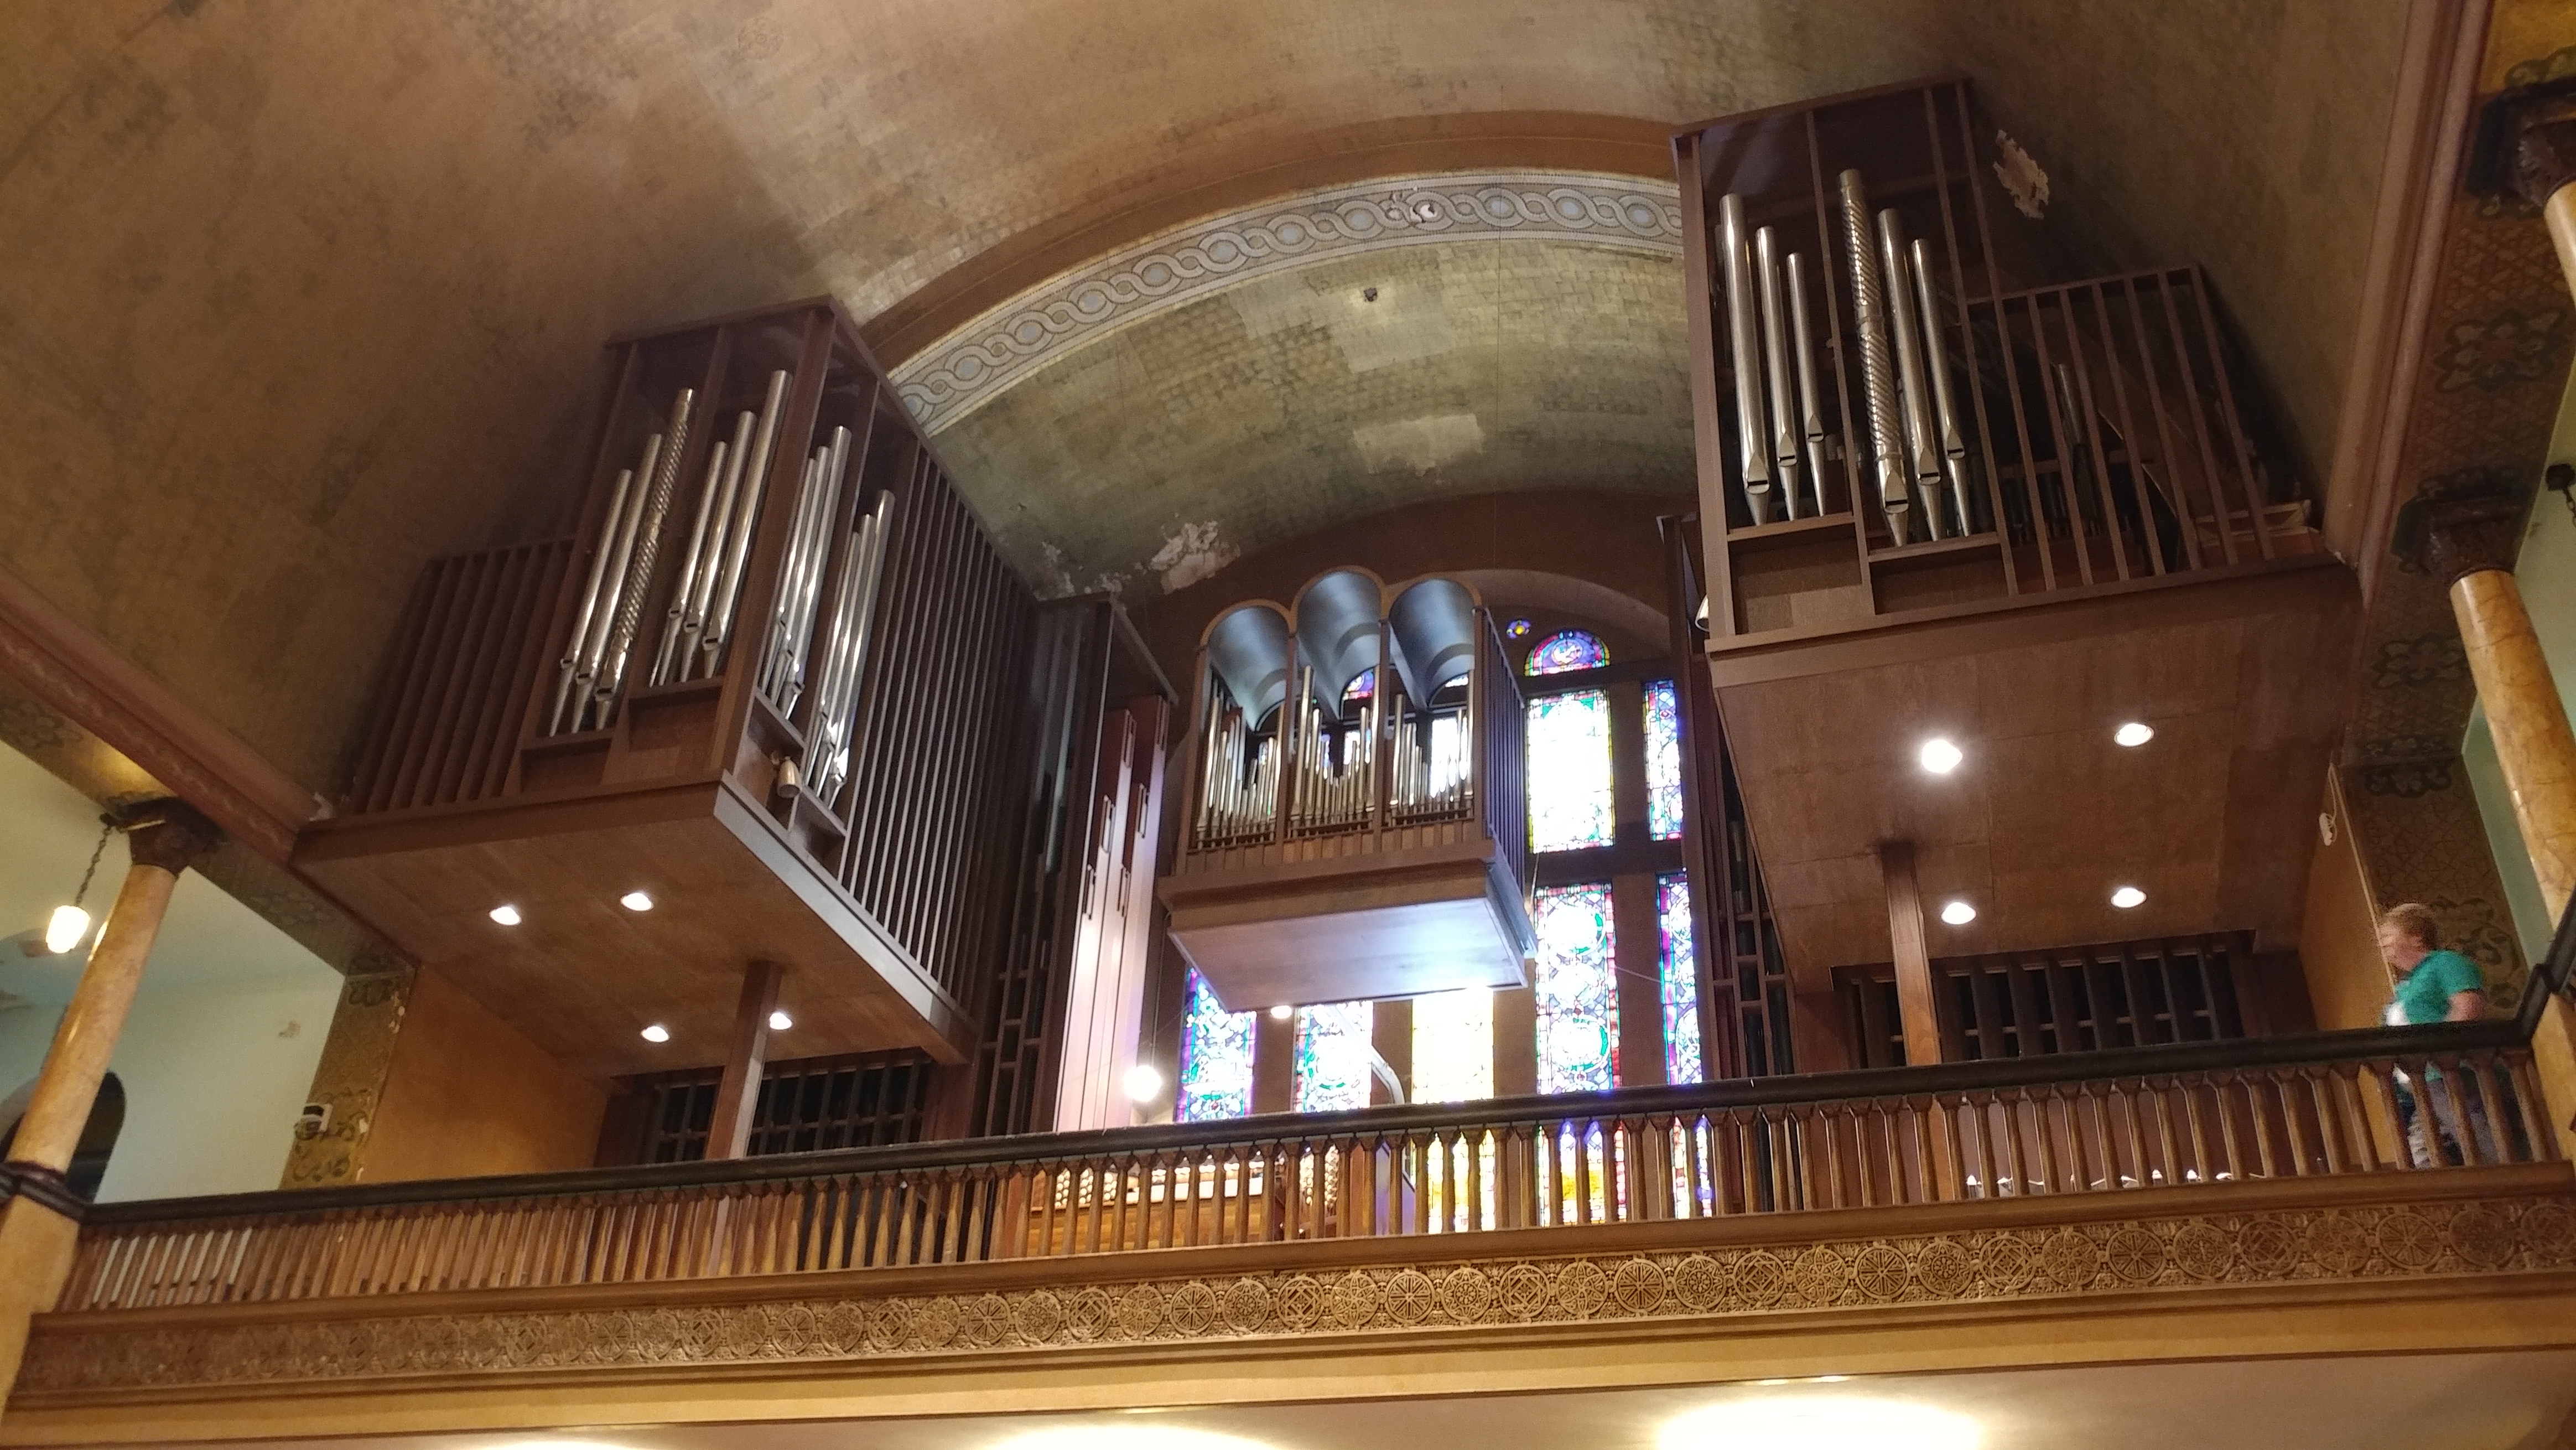 An image of an organ, located somewhere in the city of Buffalo NY but I can't quite remember where.